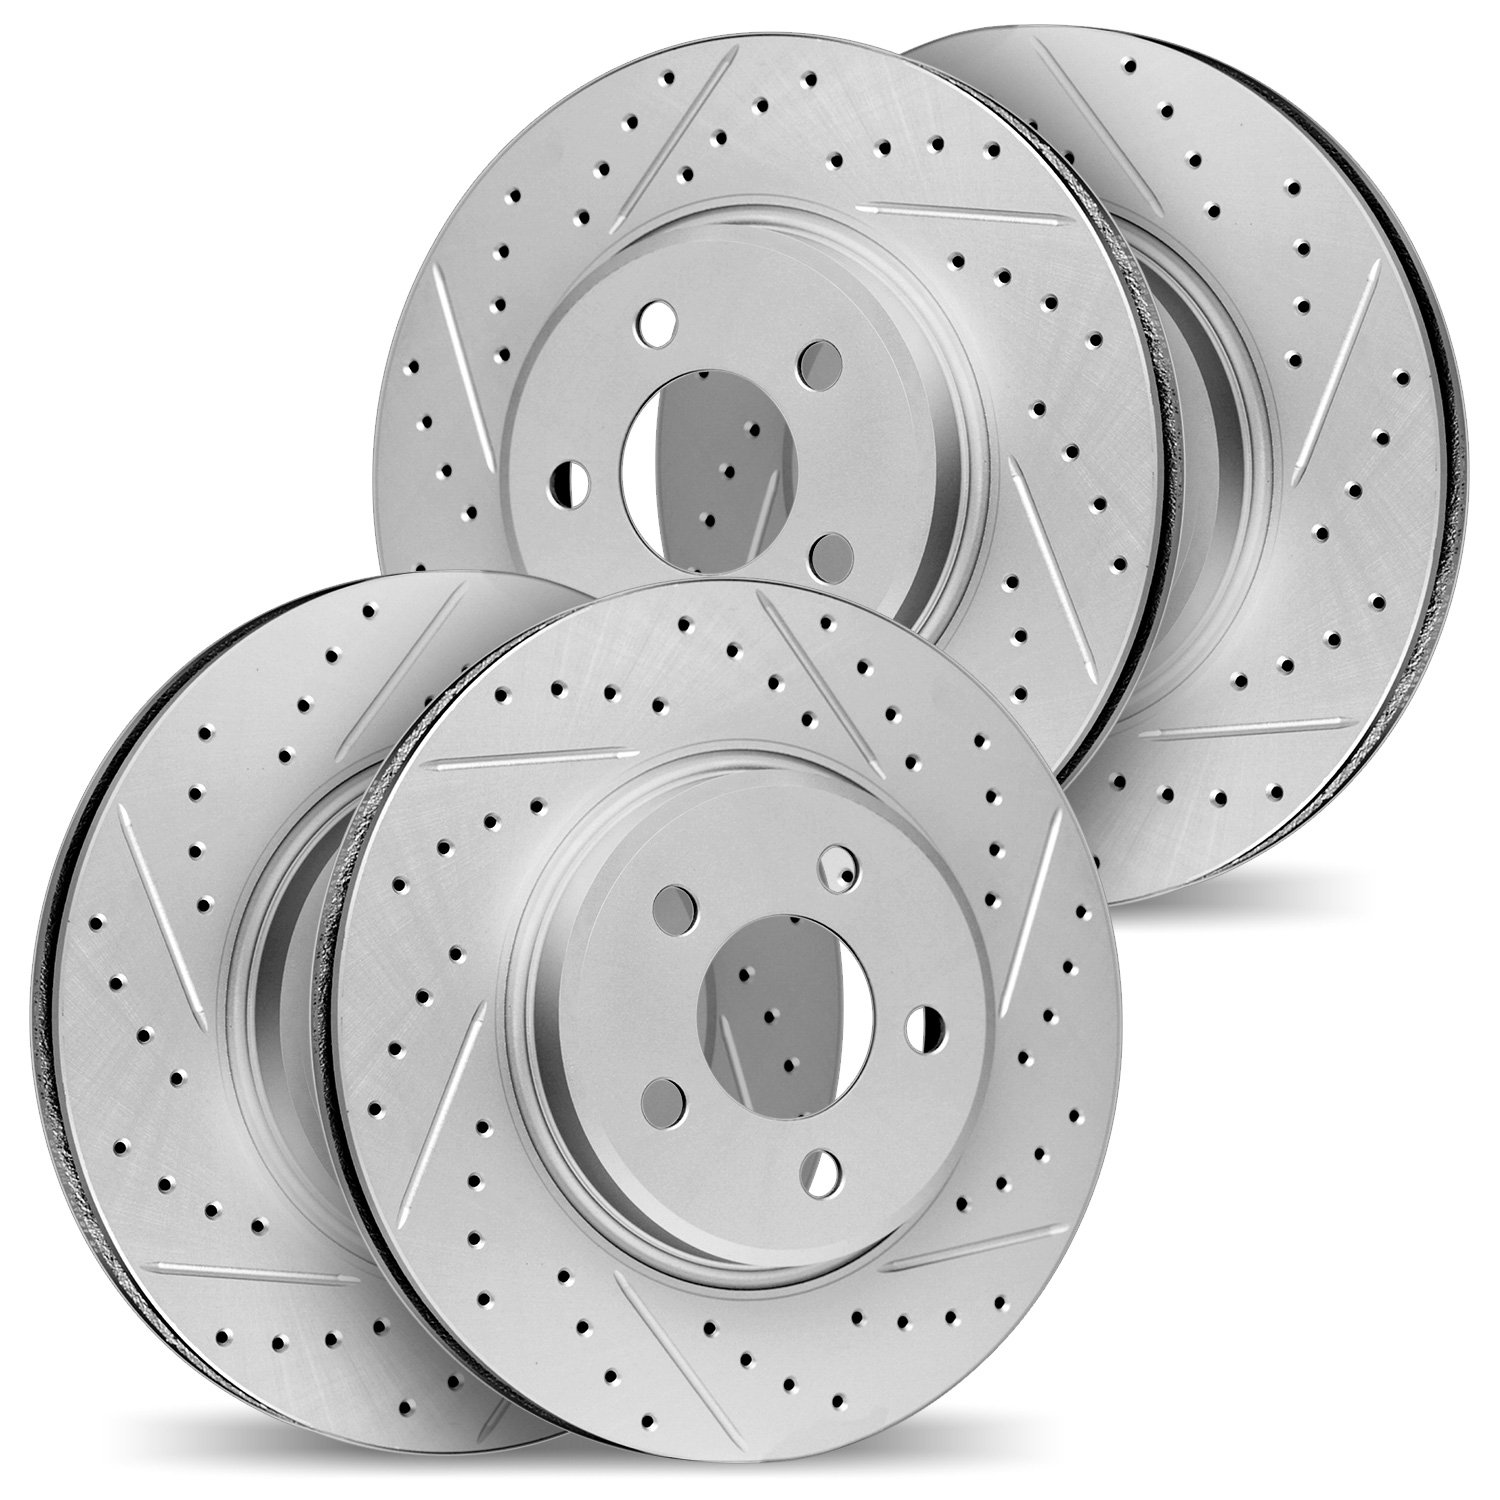 2004-31025 Geoperformance Drilled/Slotted Brake Rotors, 2006-2006 BMW, Position: Front and Rear